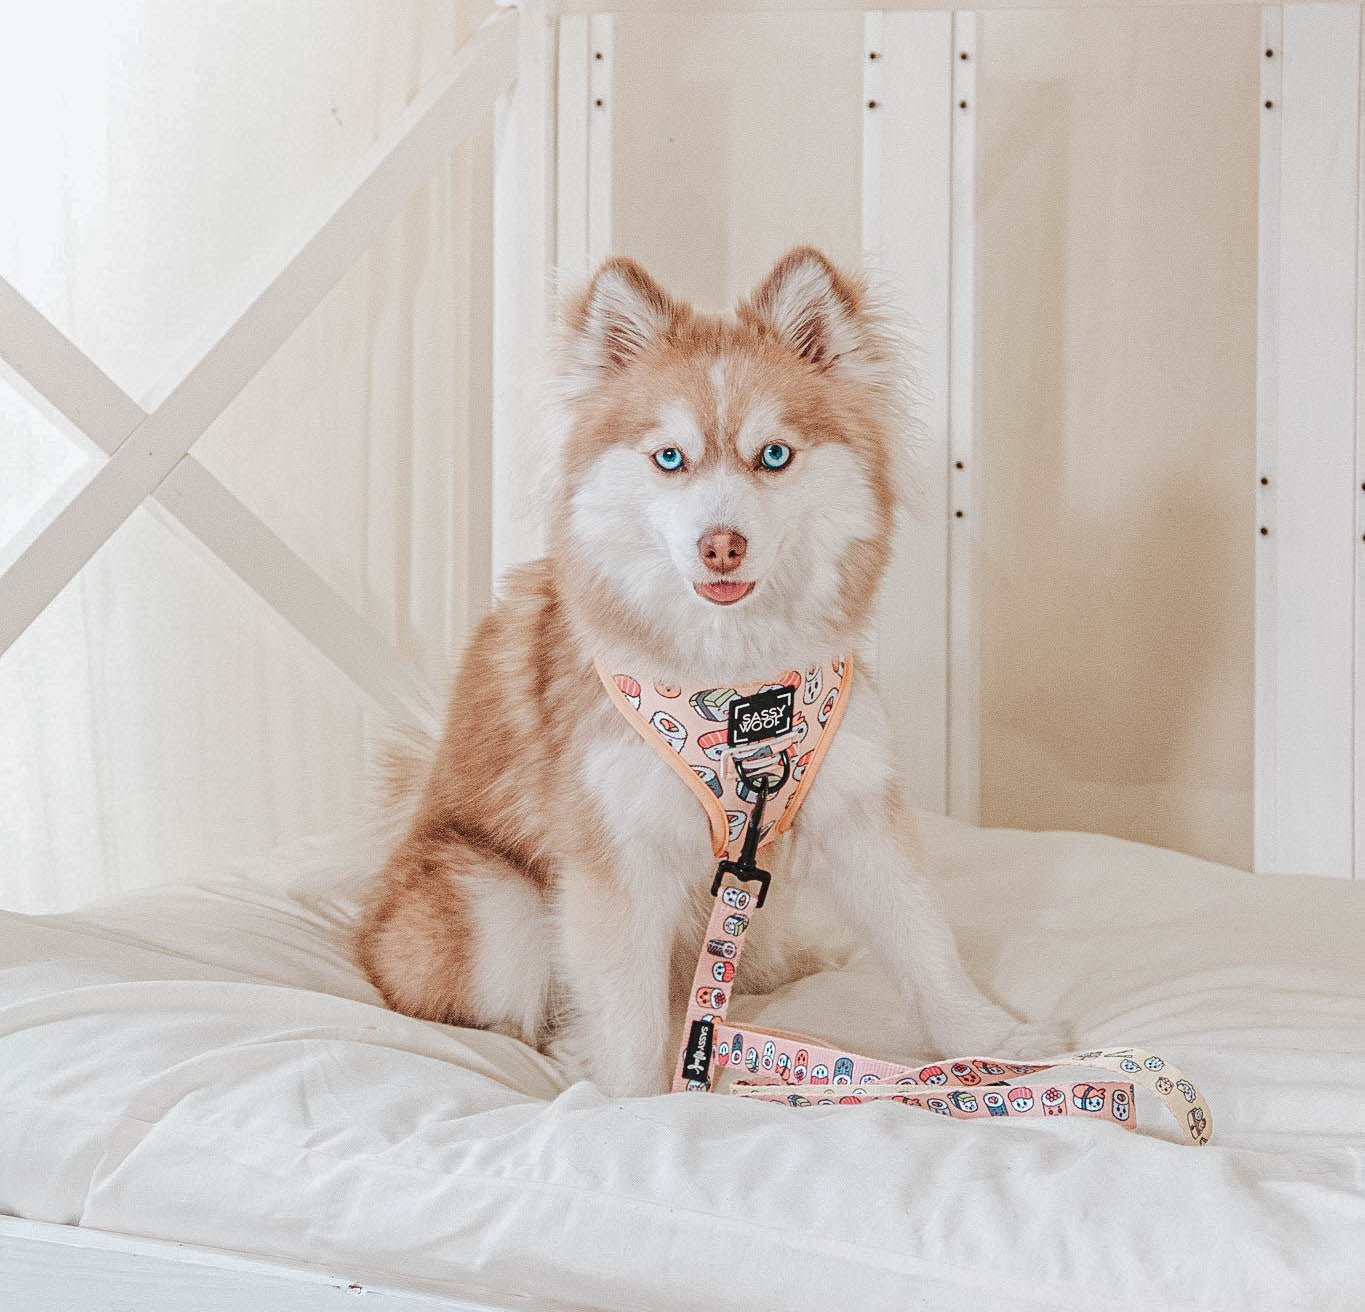 INFLUENCER_CONTENT | @ROSEY.LILY.POMSKIES | SIZE S